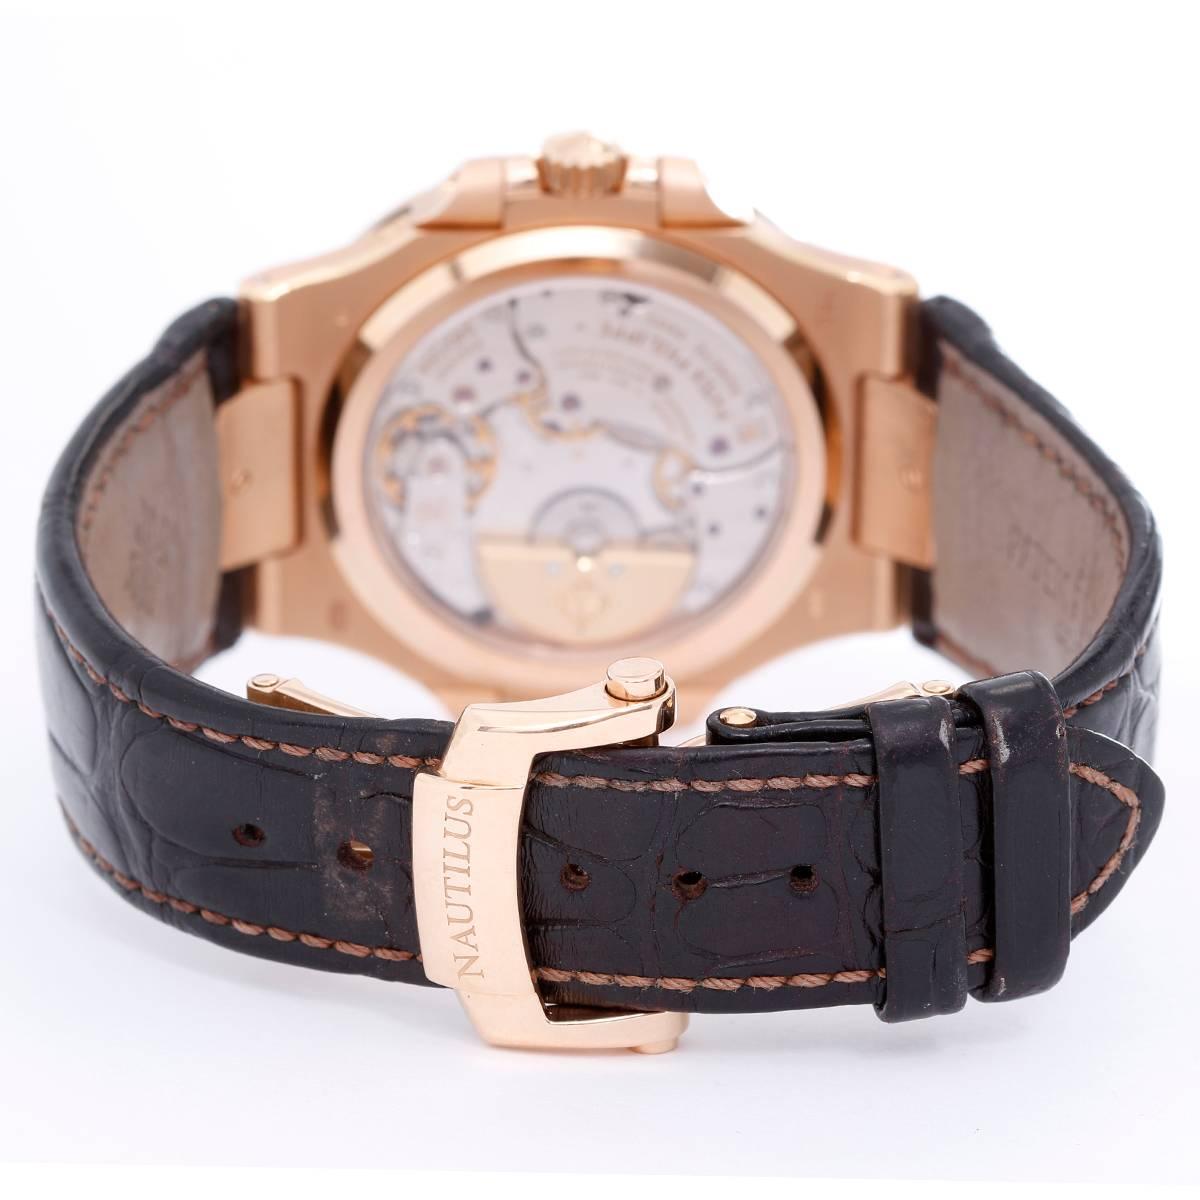 Patek Philippe & Co. Nautilus 18K Rose Gold Watch 5712R
-  Automatic winding. 18K Rose Gold ( 43 mm x 38 mm ). Black dial with Date, Moon-phase, Small second, Power Reserve sub dials. Brown leather bracelet with Patek Philippe Nautilus clasp.